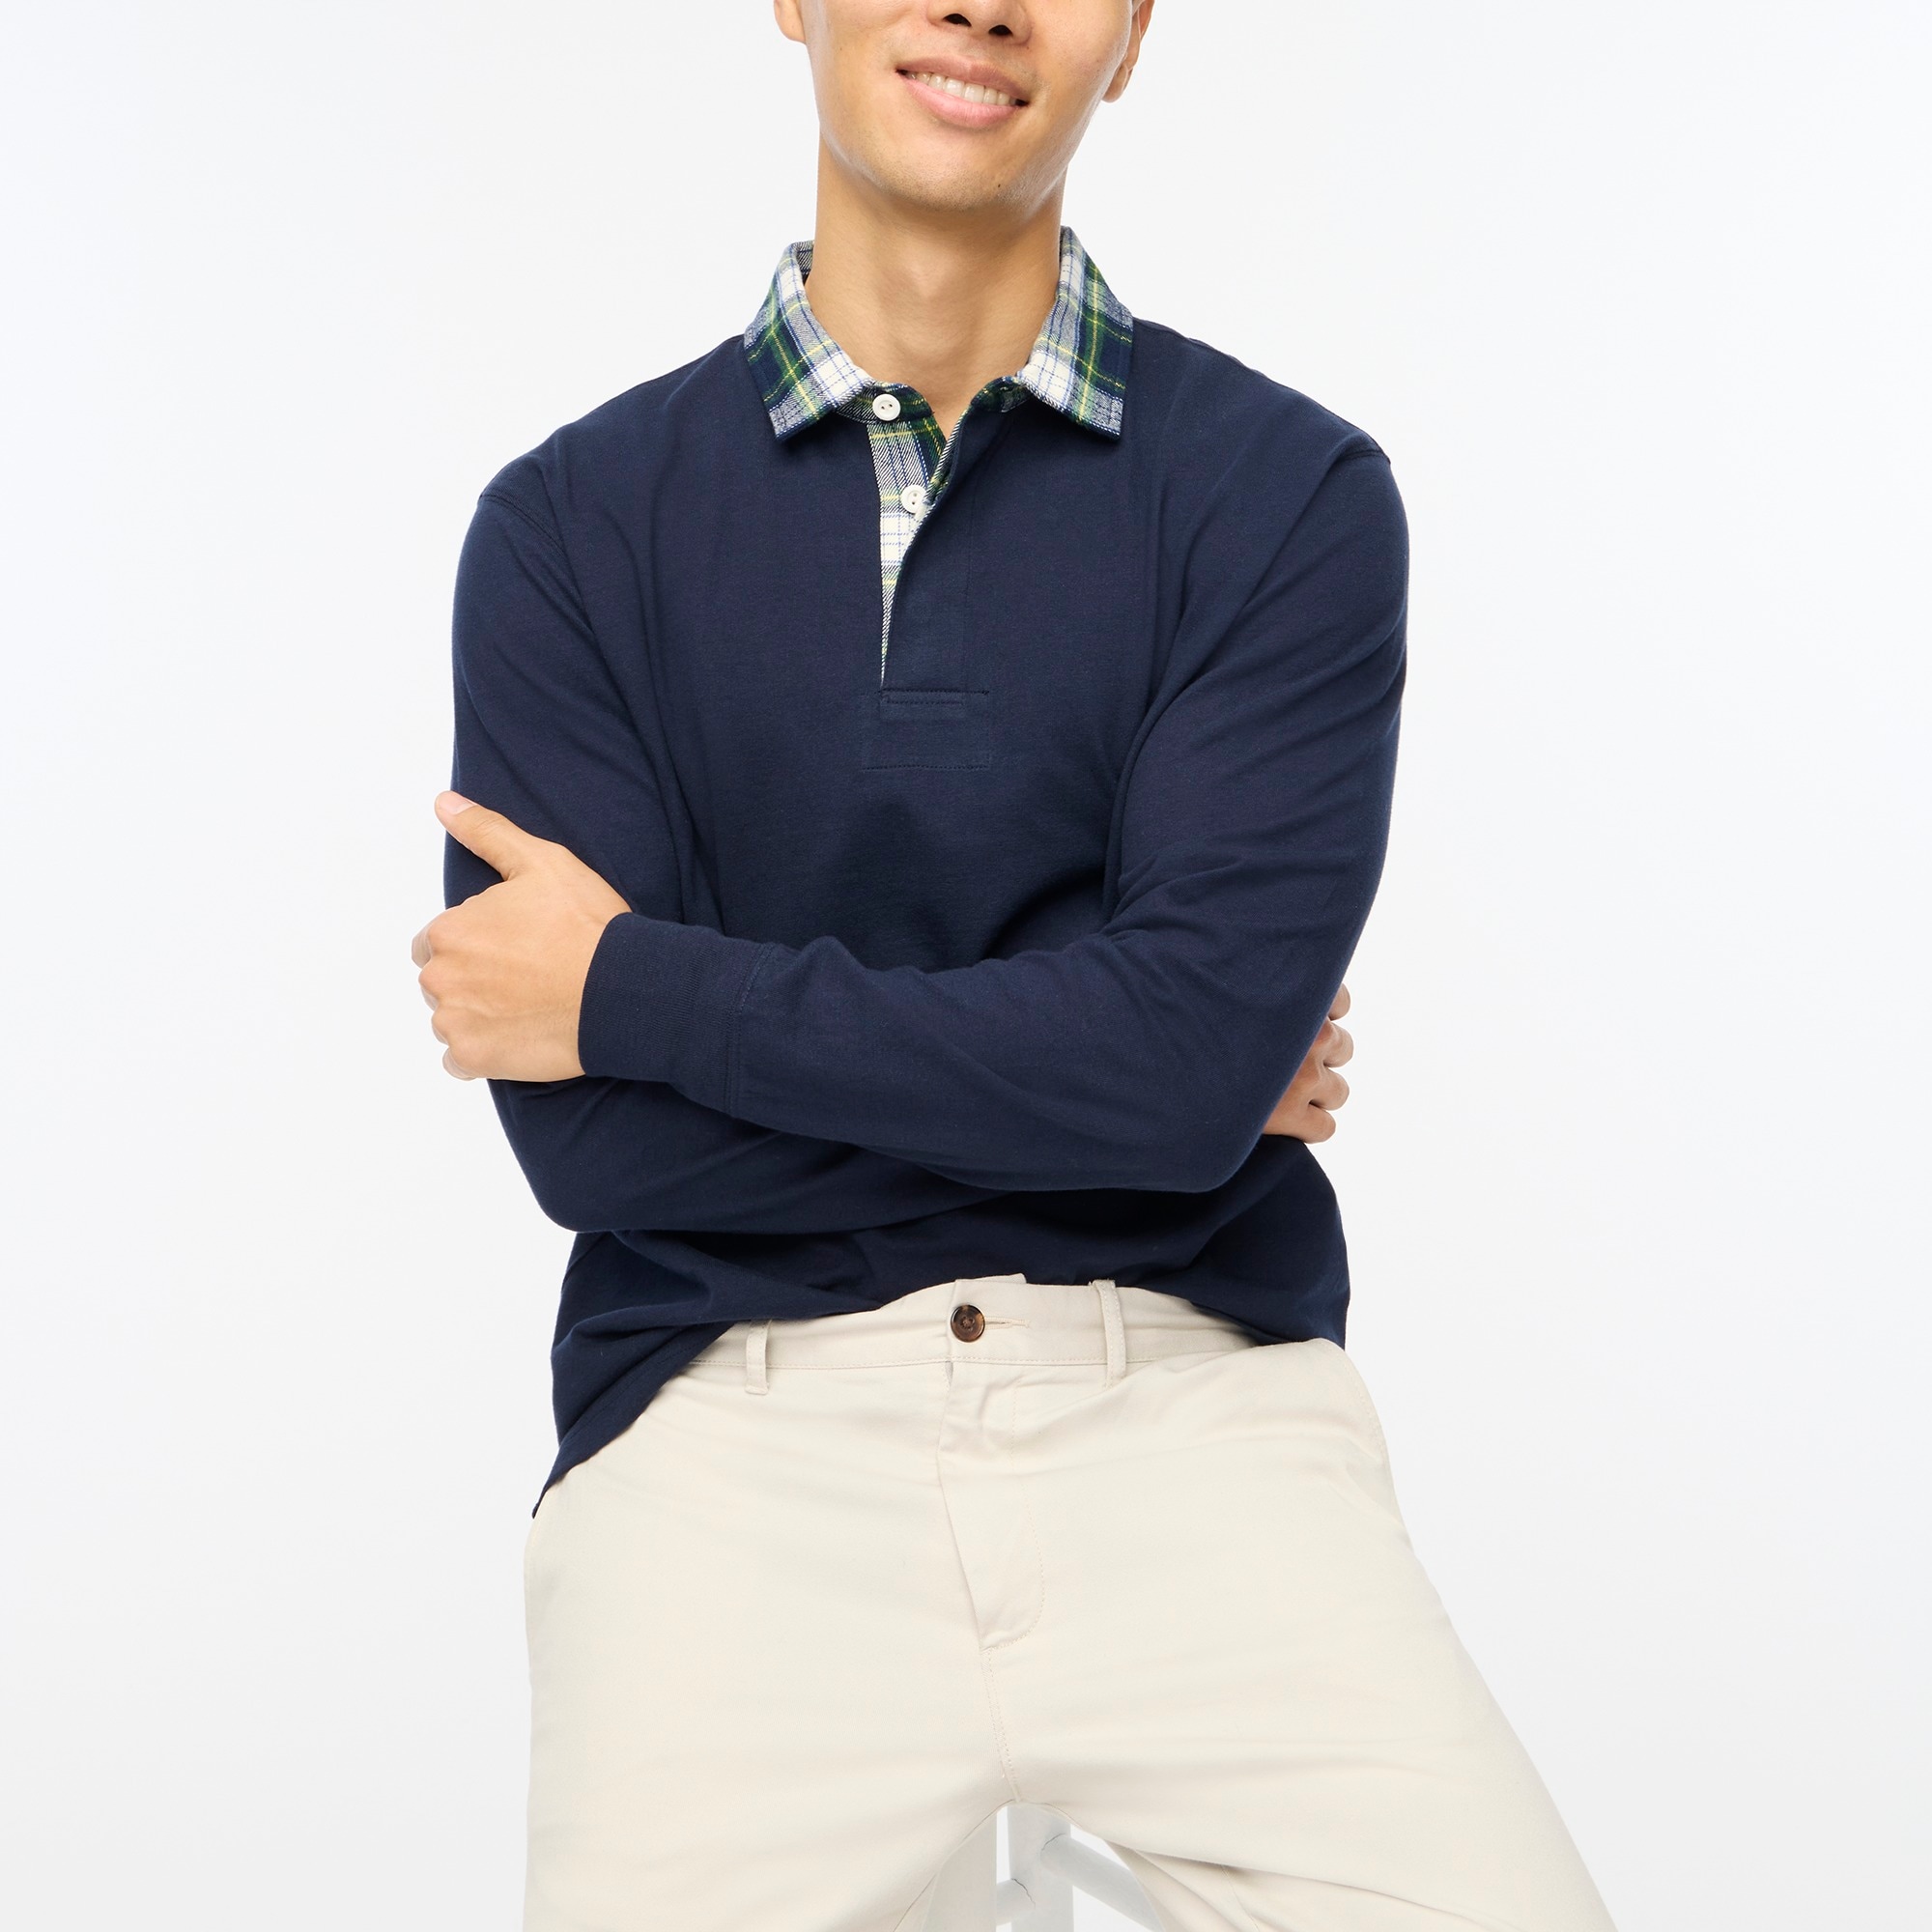 Jcrew Rugby shirt with flannel collar